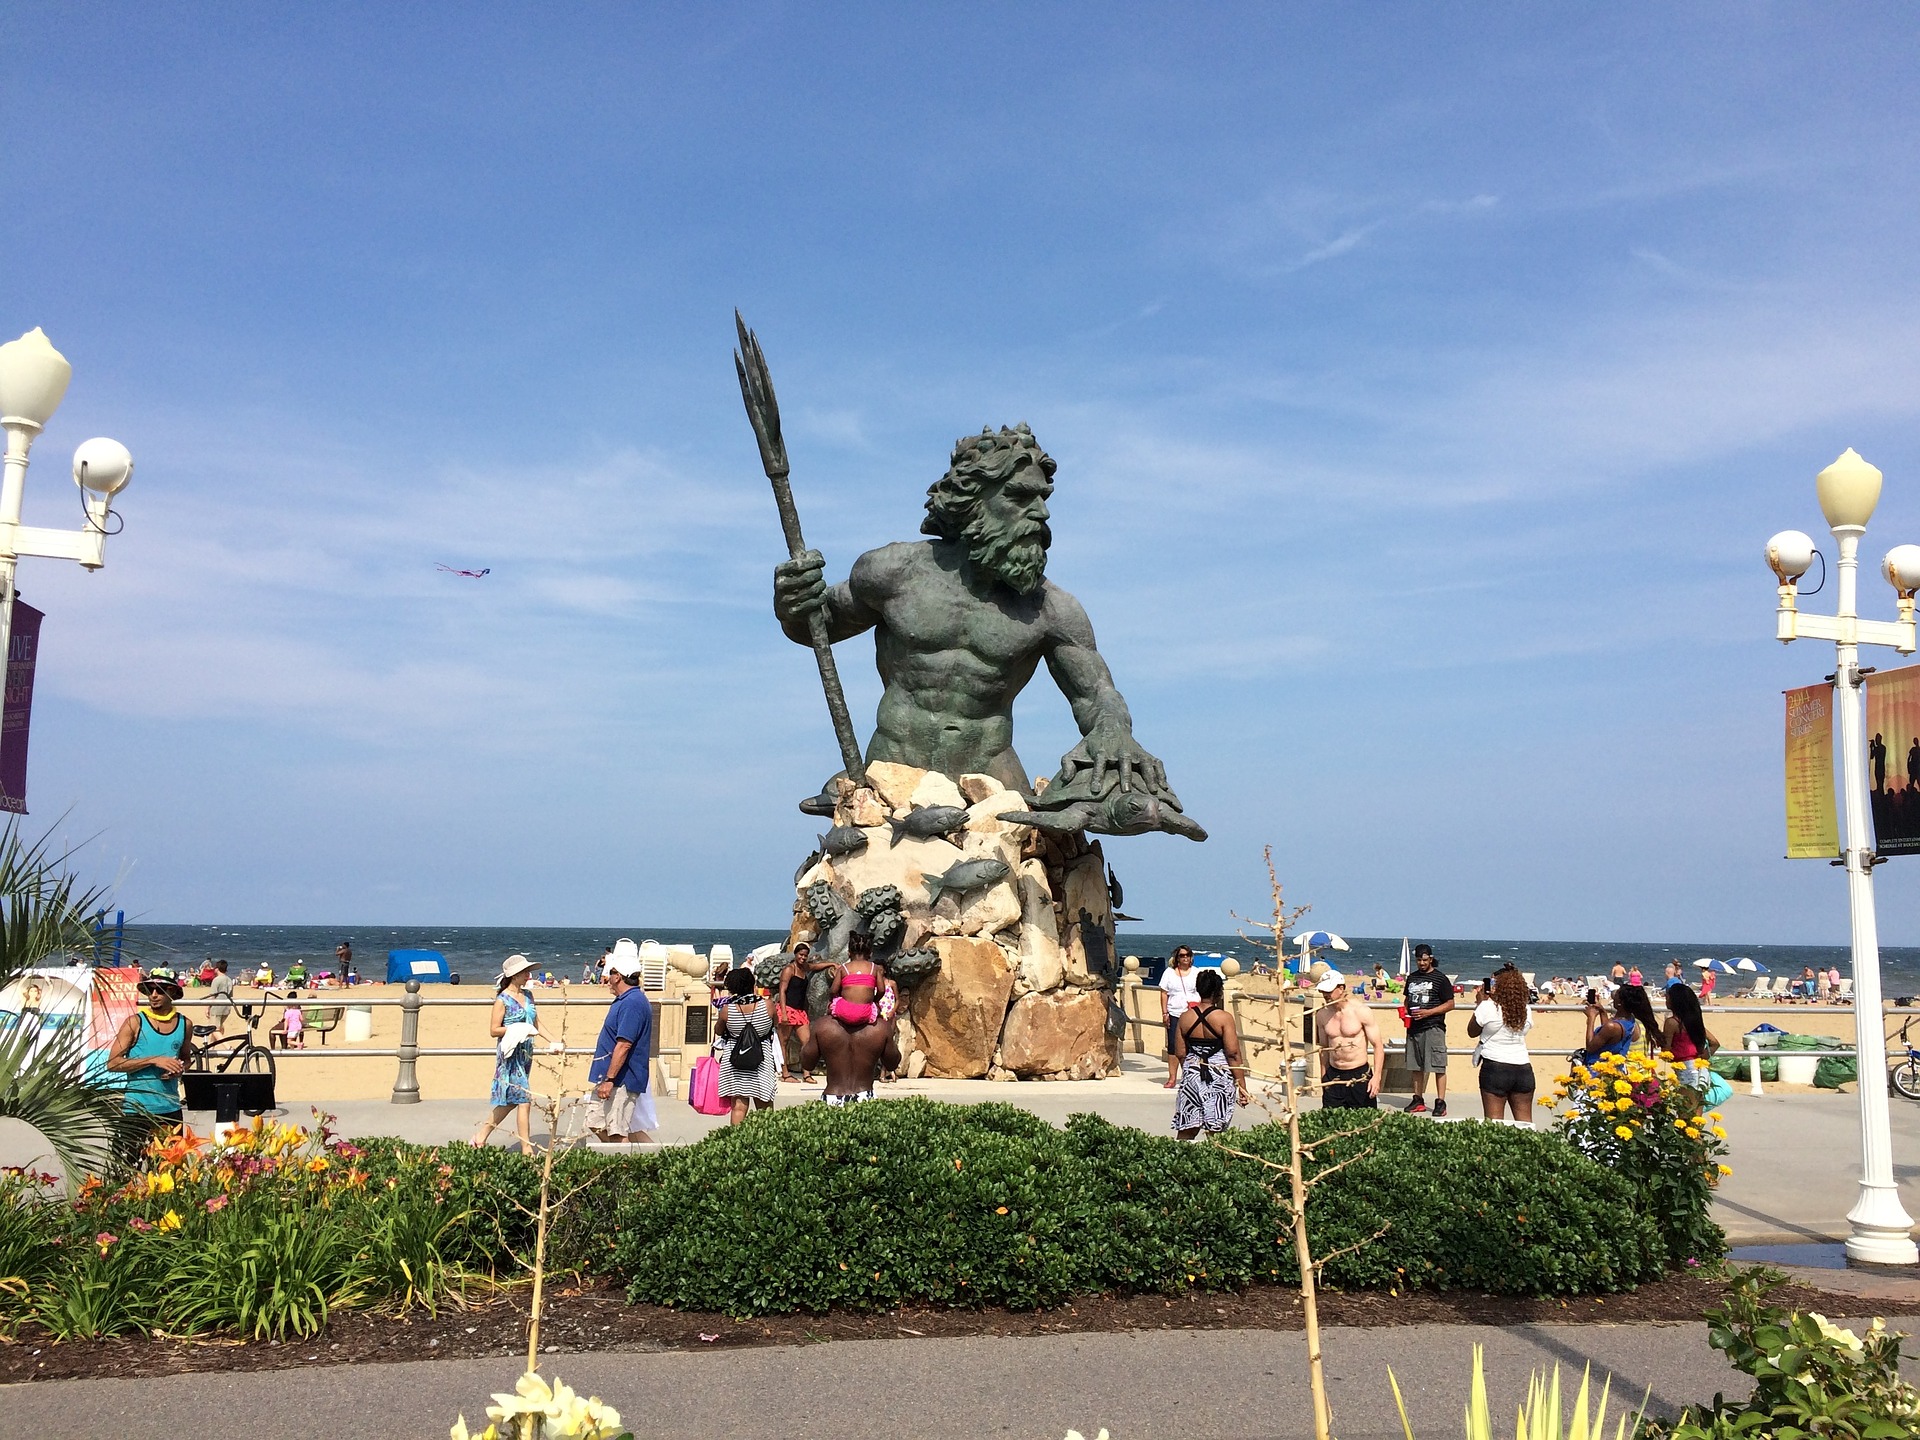 Enjoy some outside fun by visiting the Neptune Statue, or enjoy your yard swat-free with Mosquito Joe!